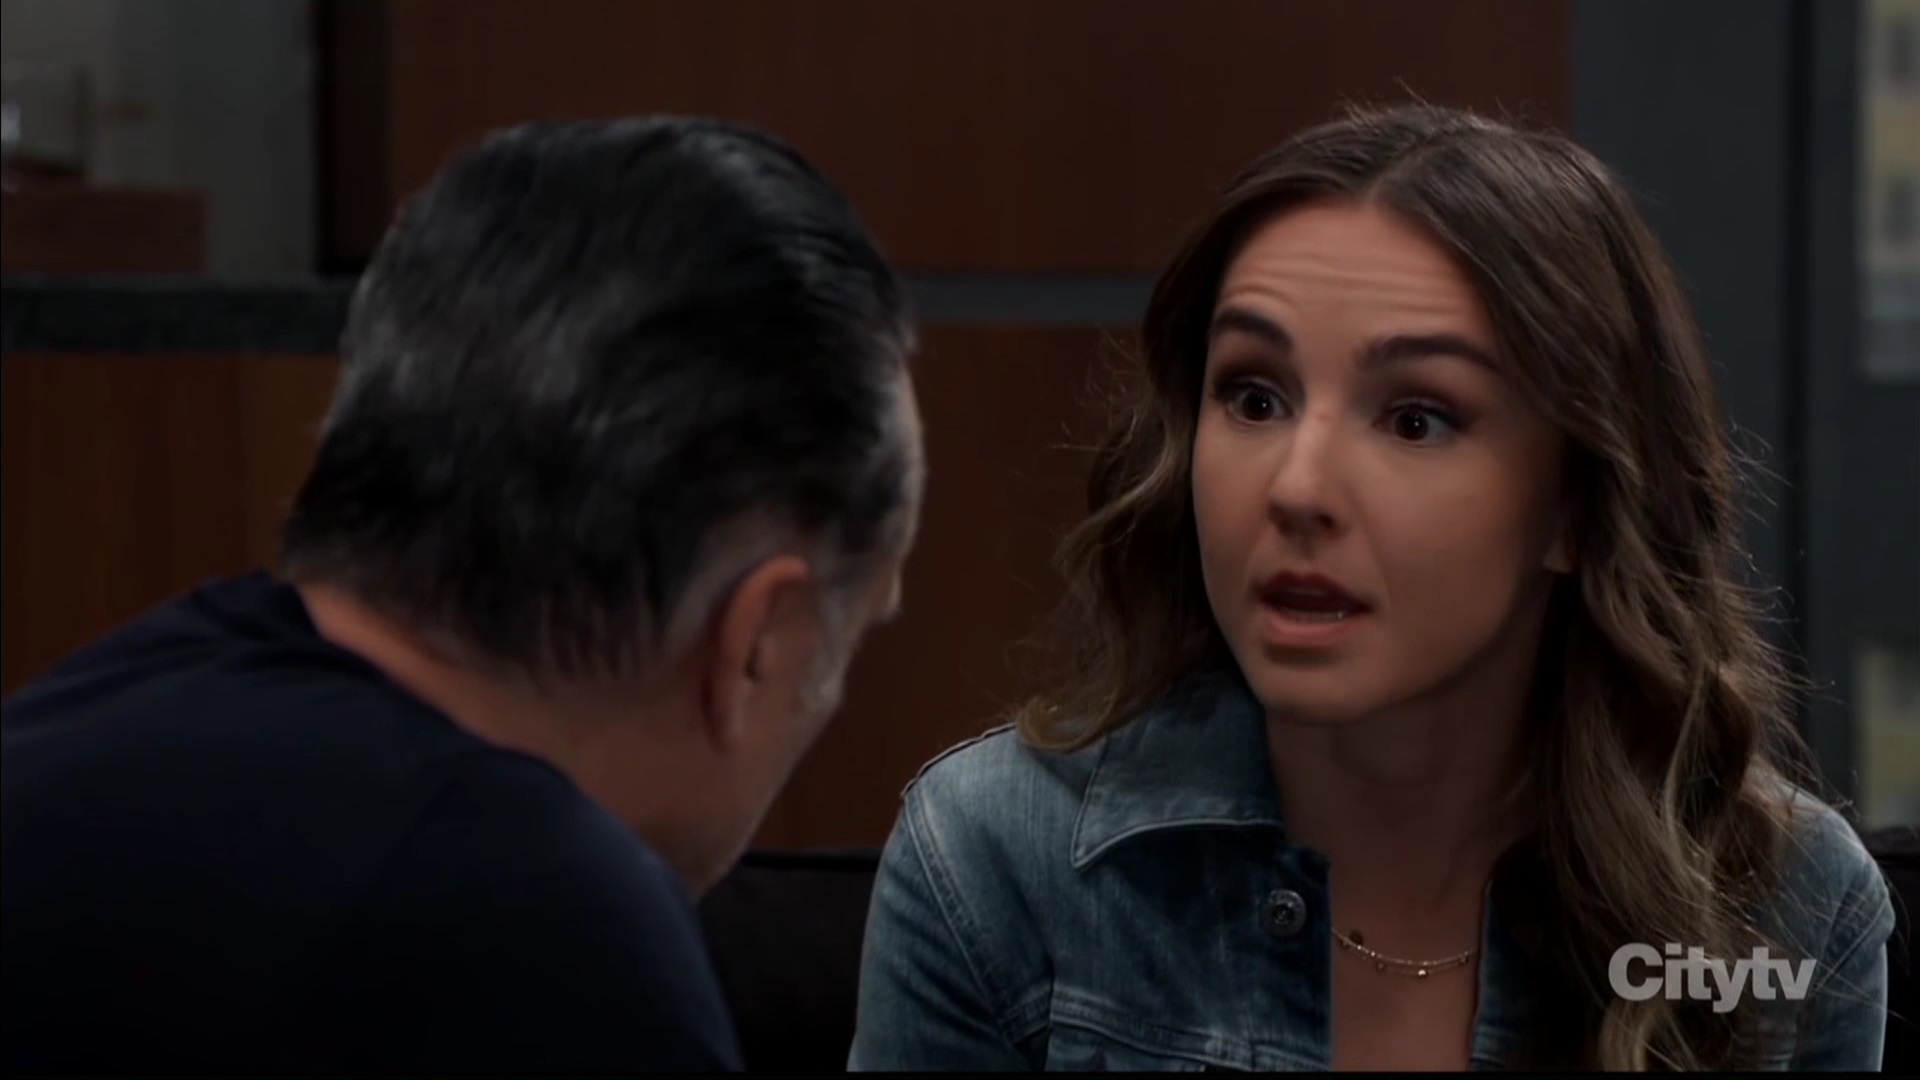 kristina likes working at youth center tells sonny